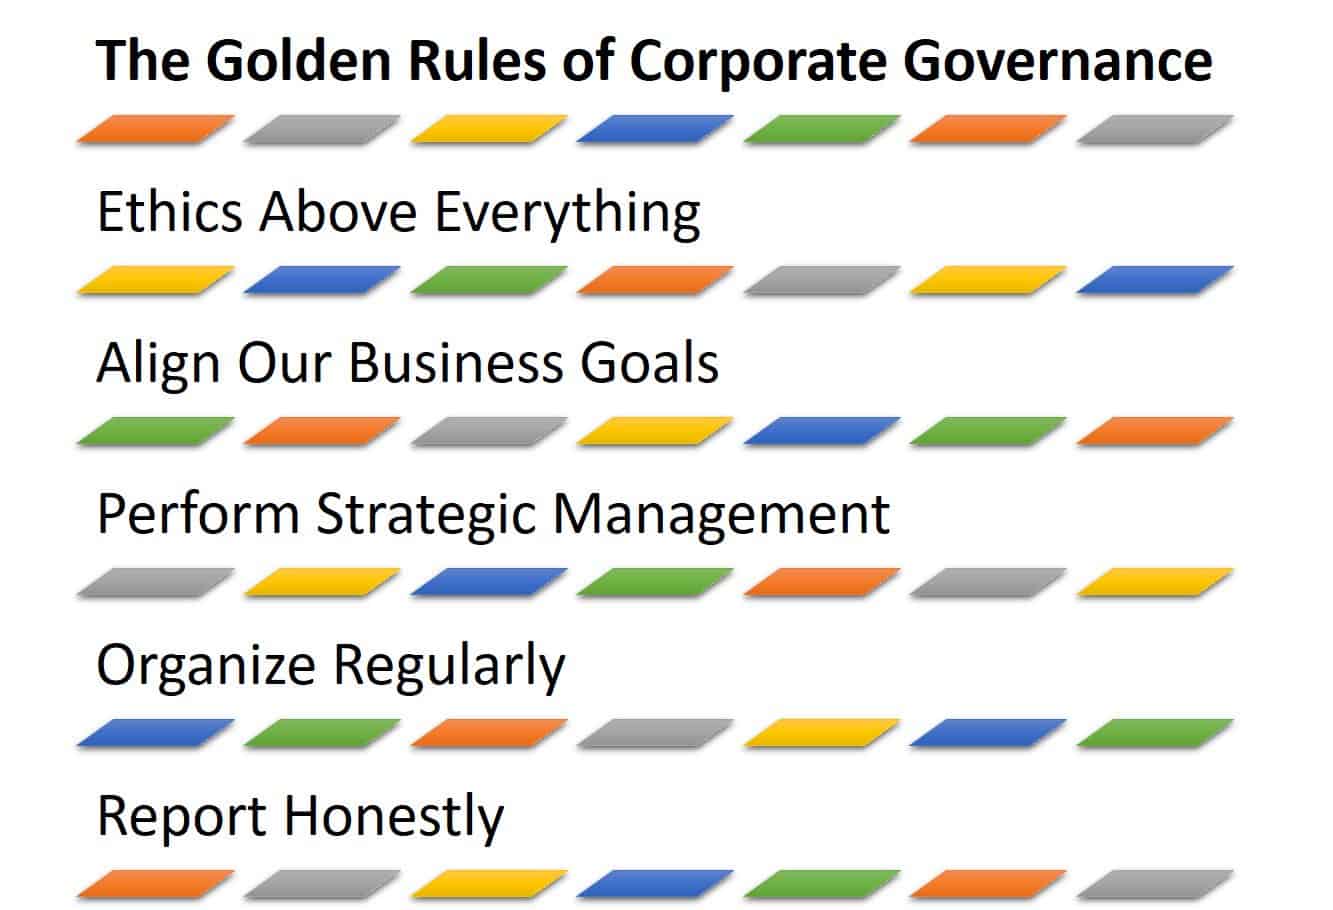 The Golden Rules of Corporate Governance